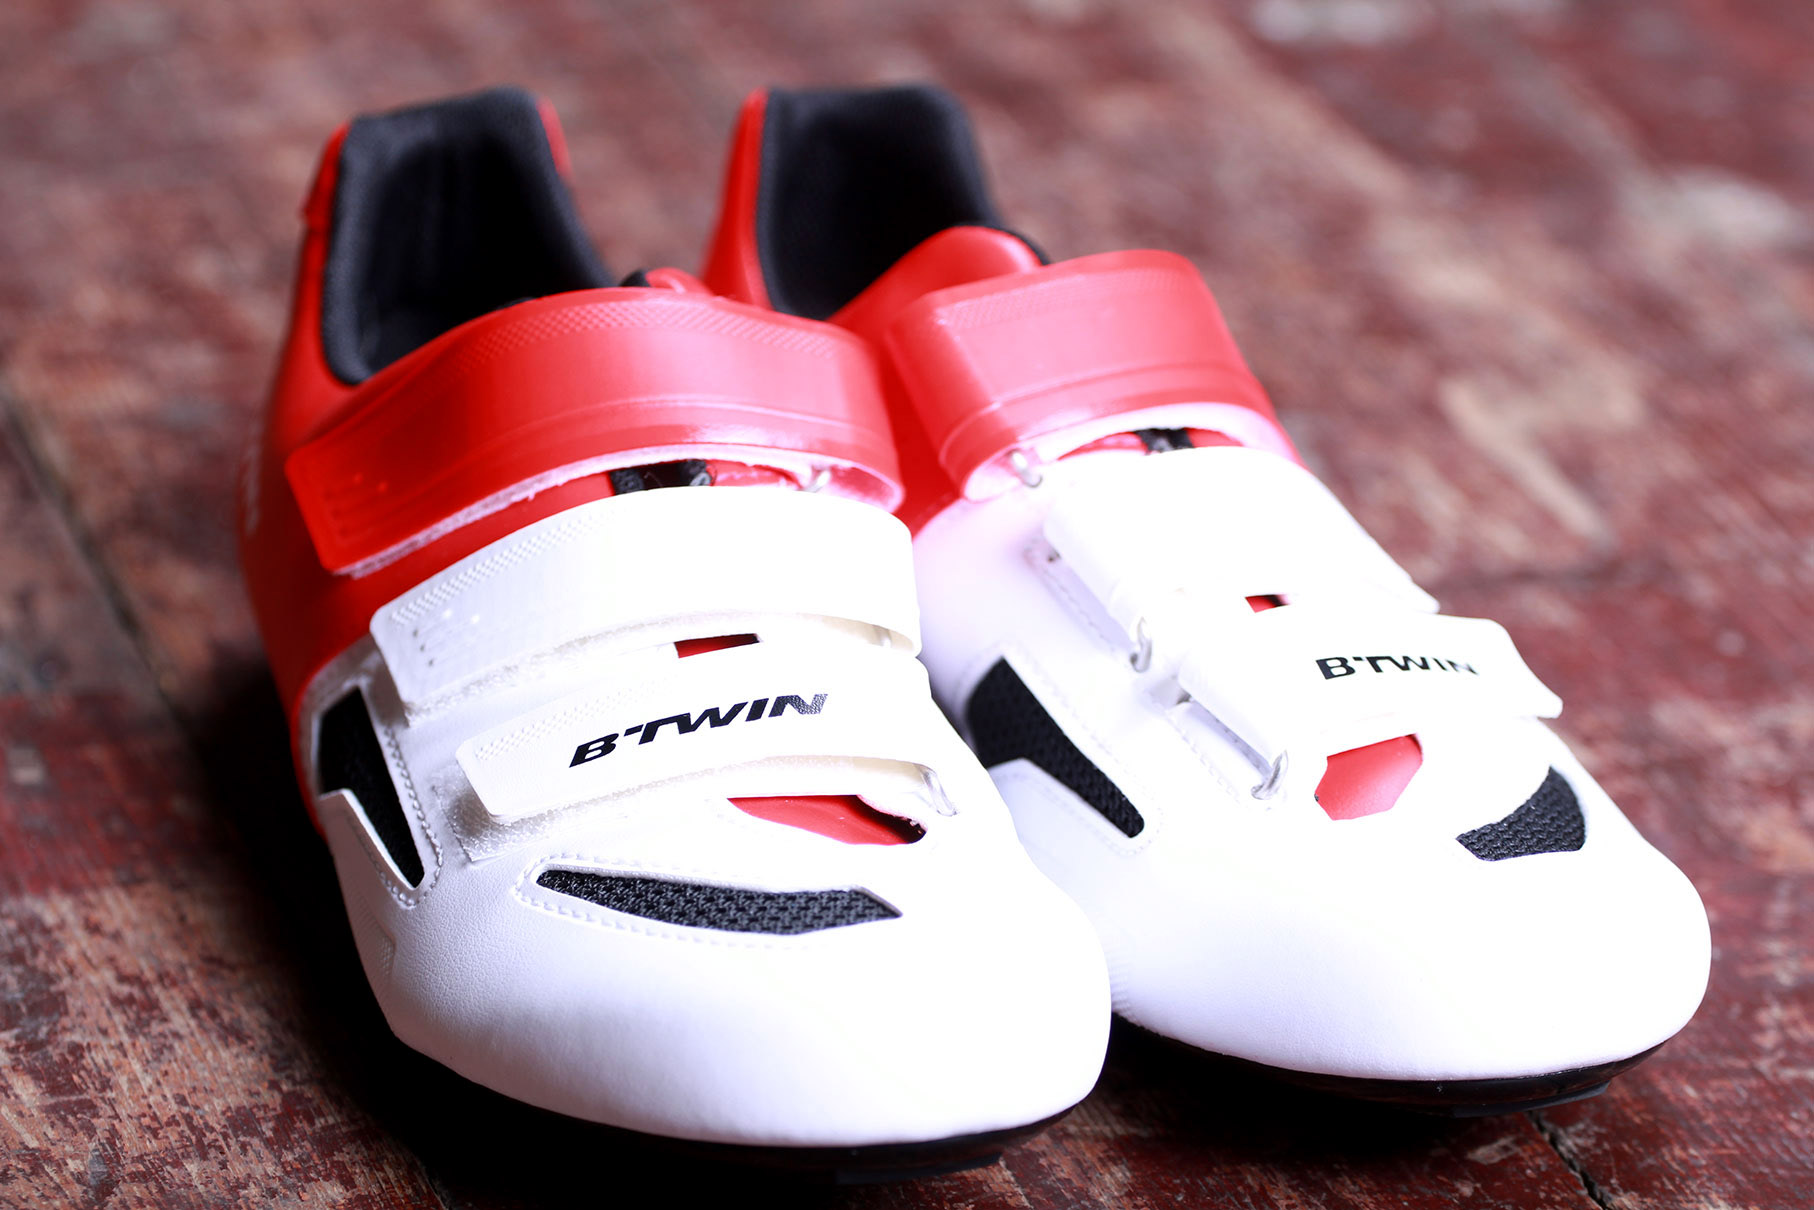 btwin 500 shoes